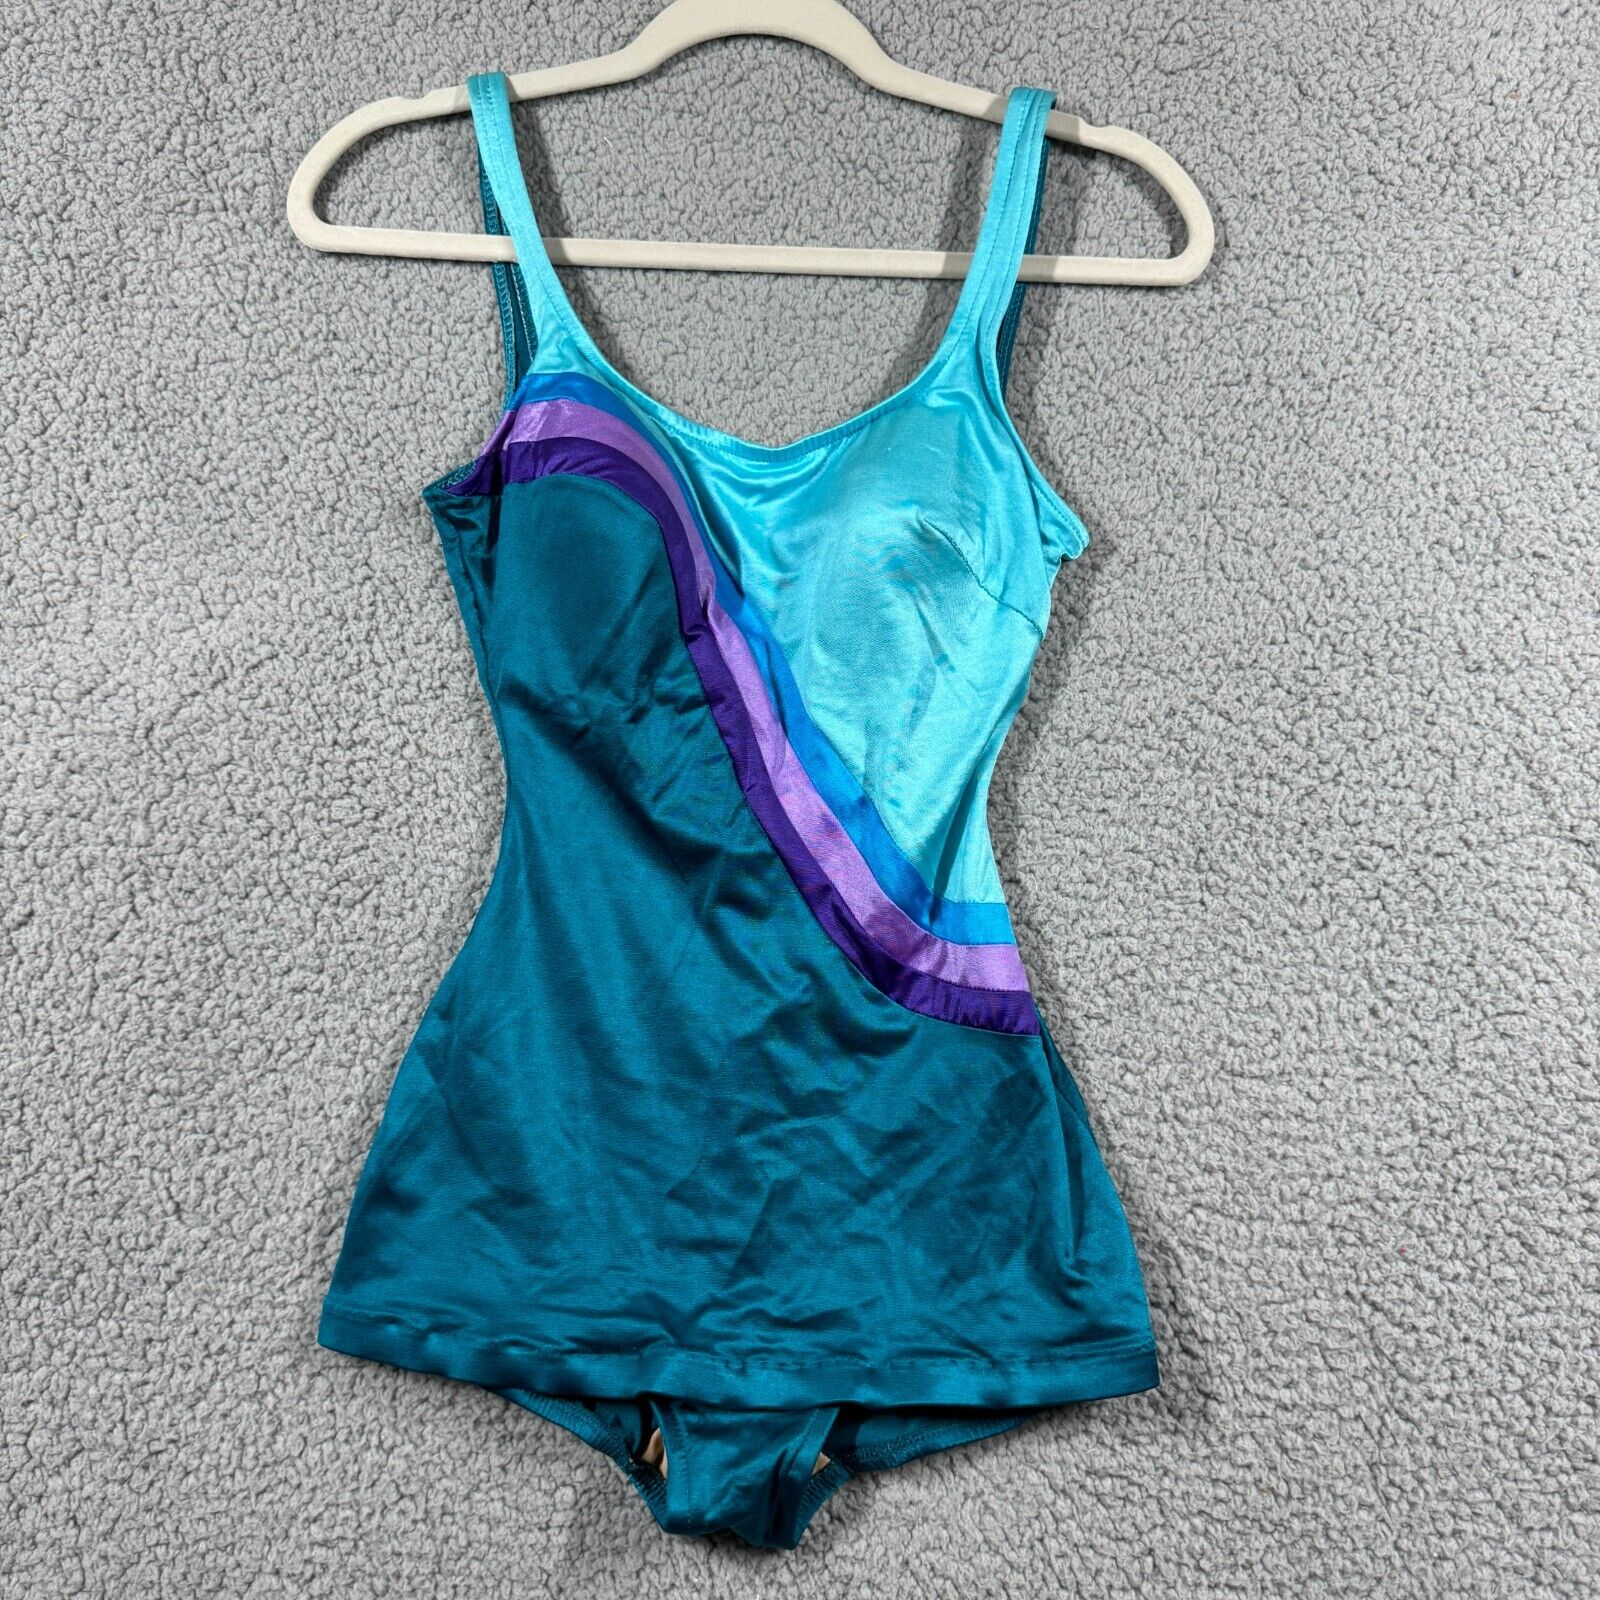 Vintage Sirena One Piece Swimsuit Womens Modern Size 6 Teal Green